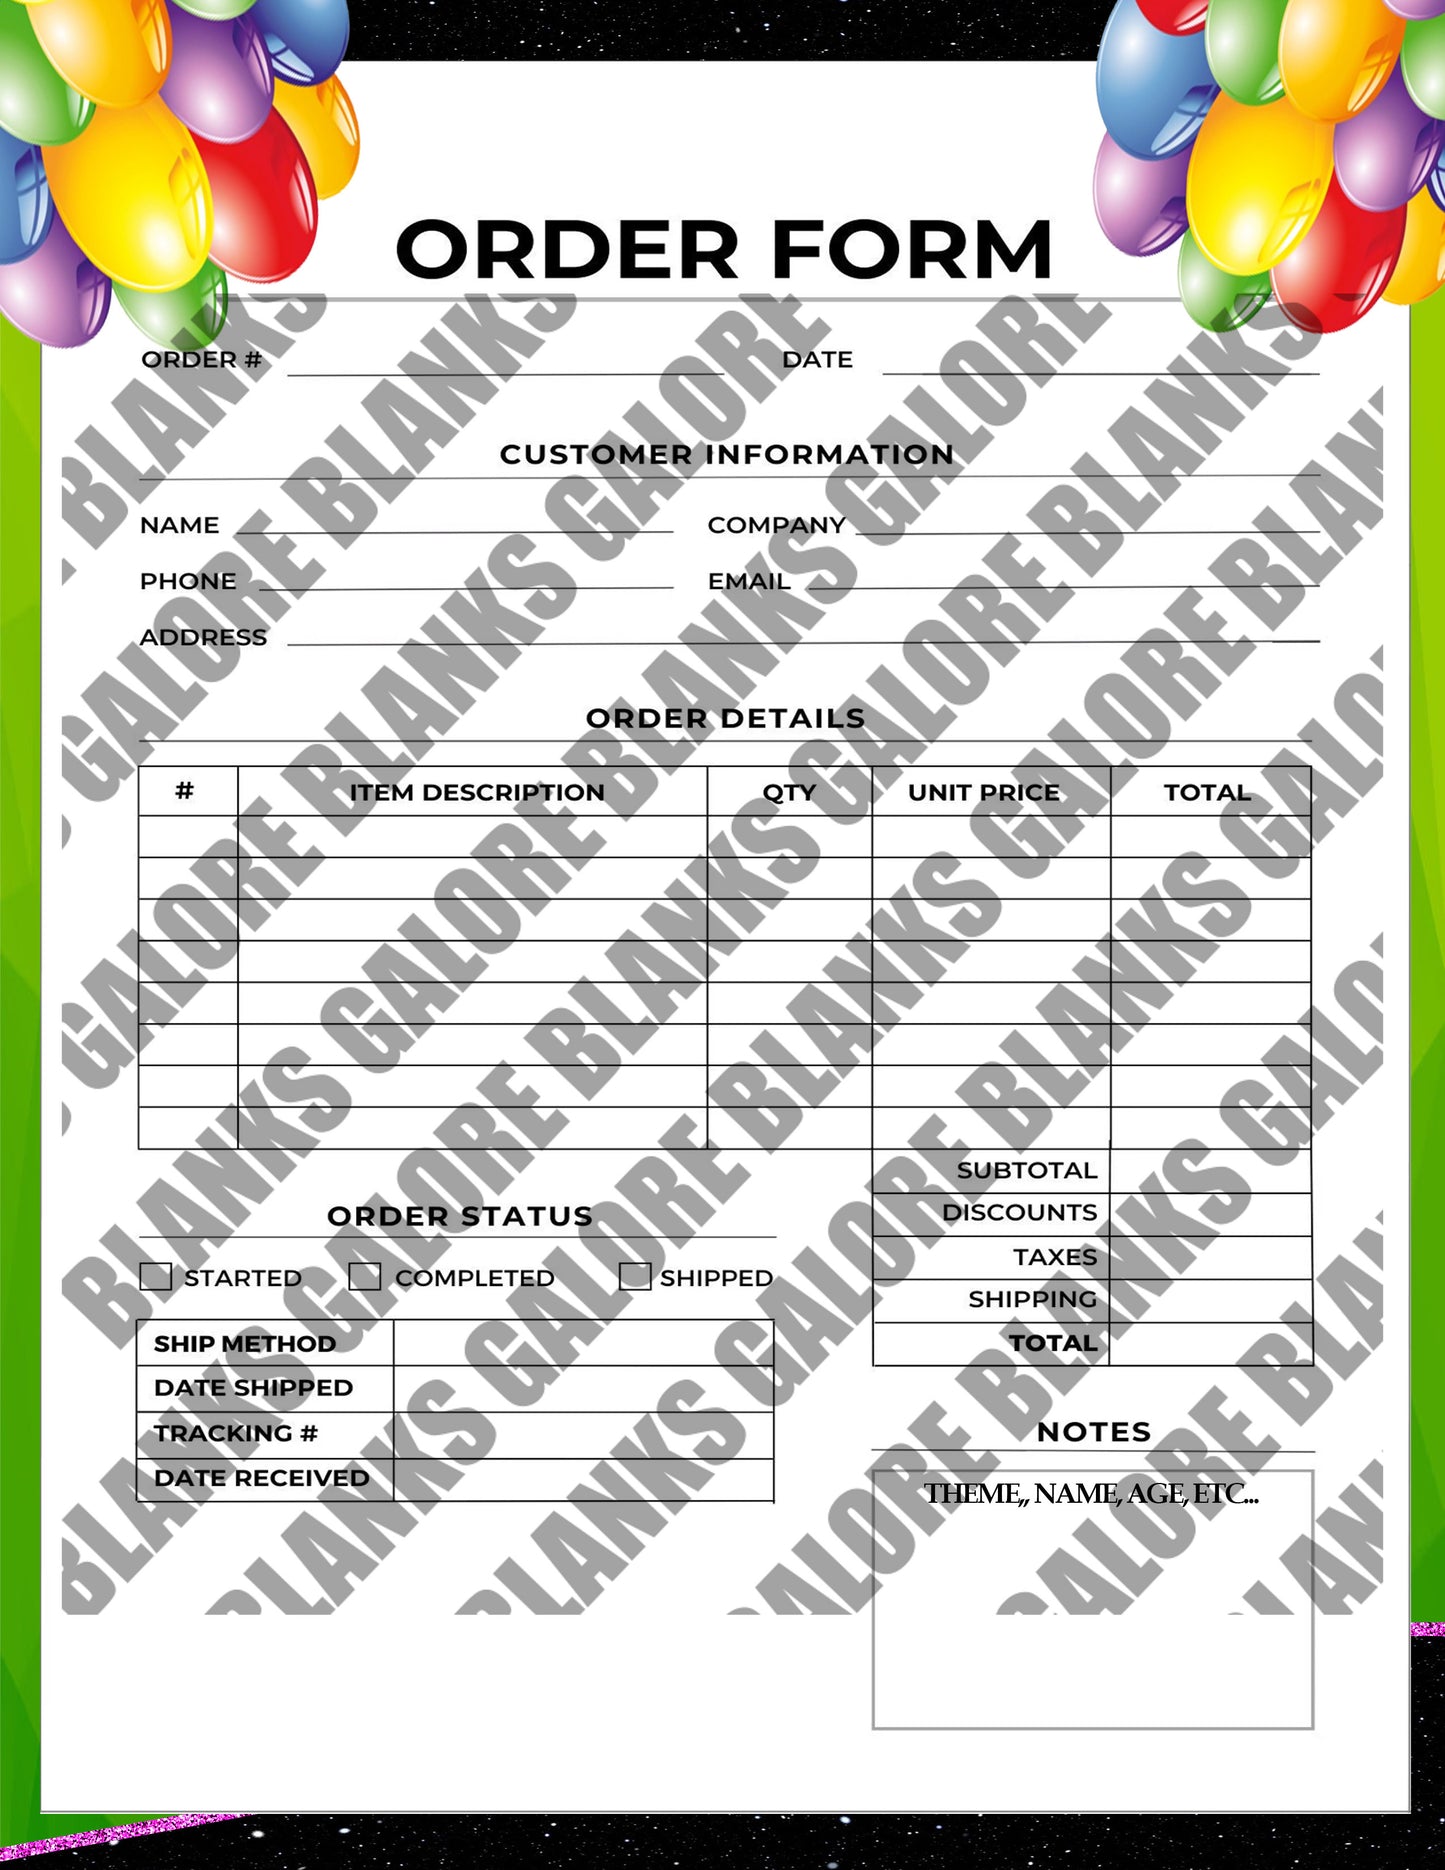 Order Form For Party Favors